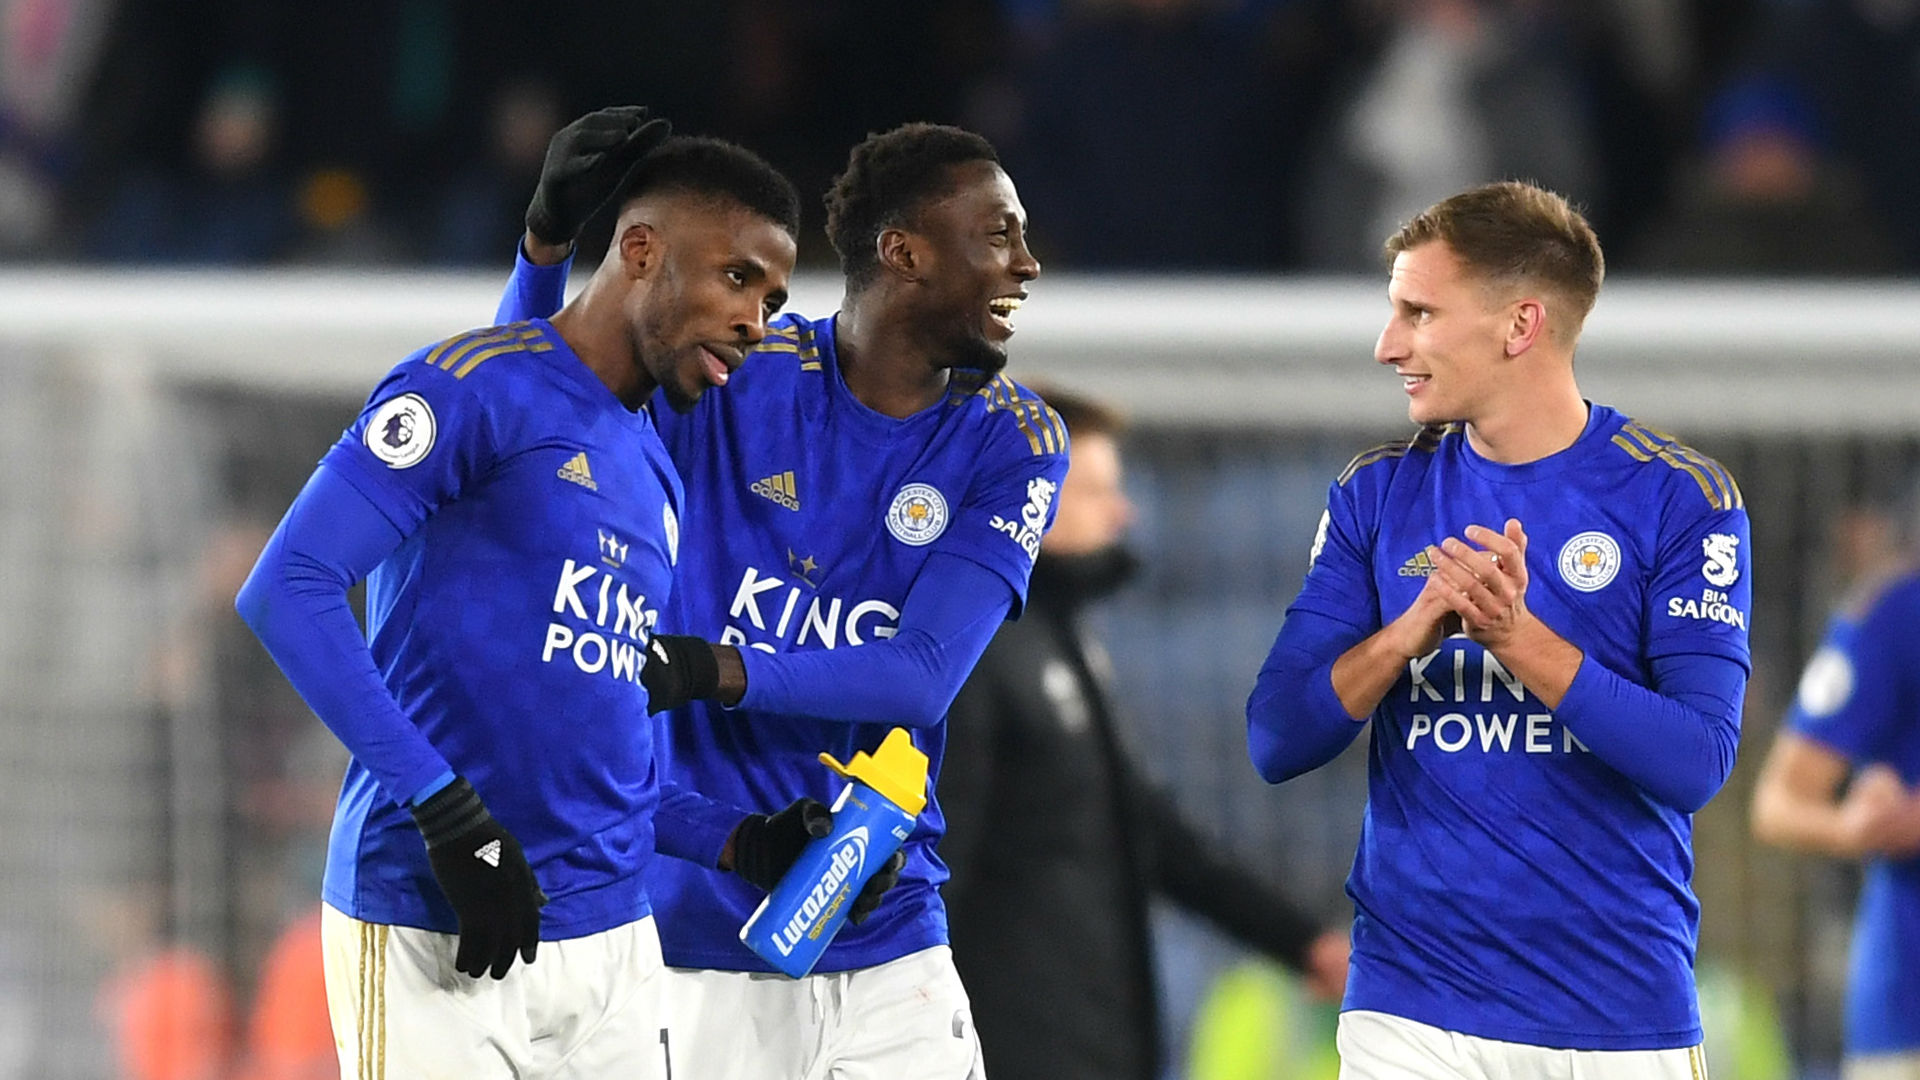 Iheanacho ‘happy’ at Leicester City despite lack of playing time